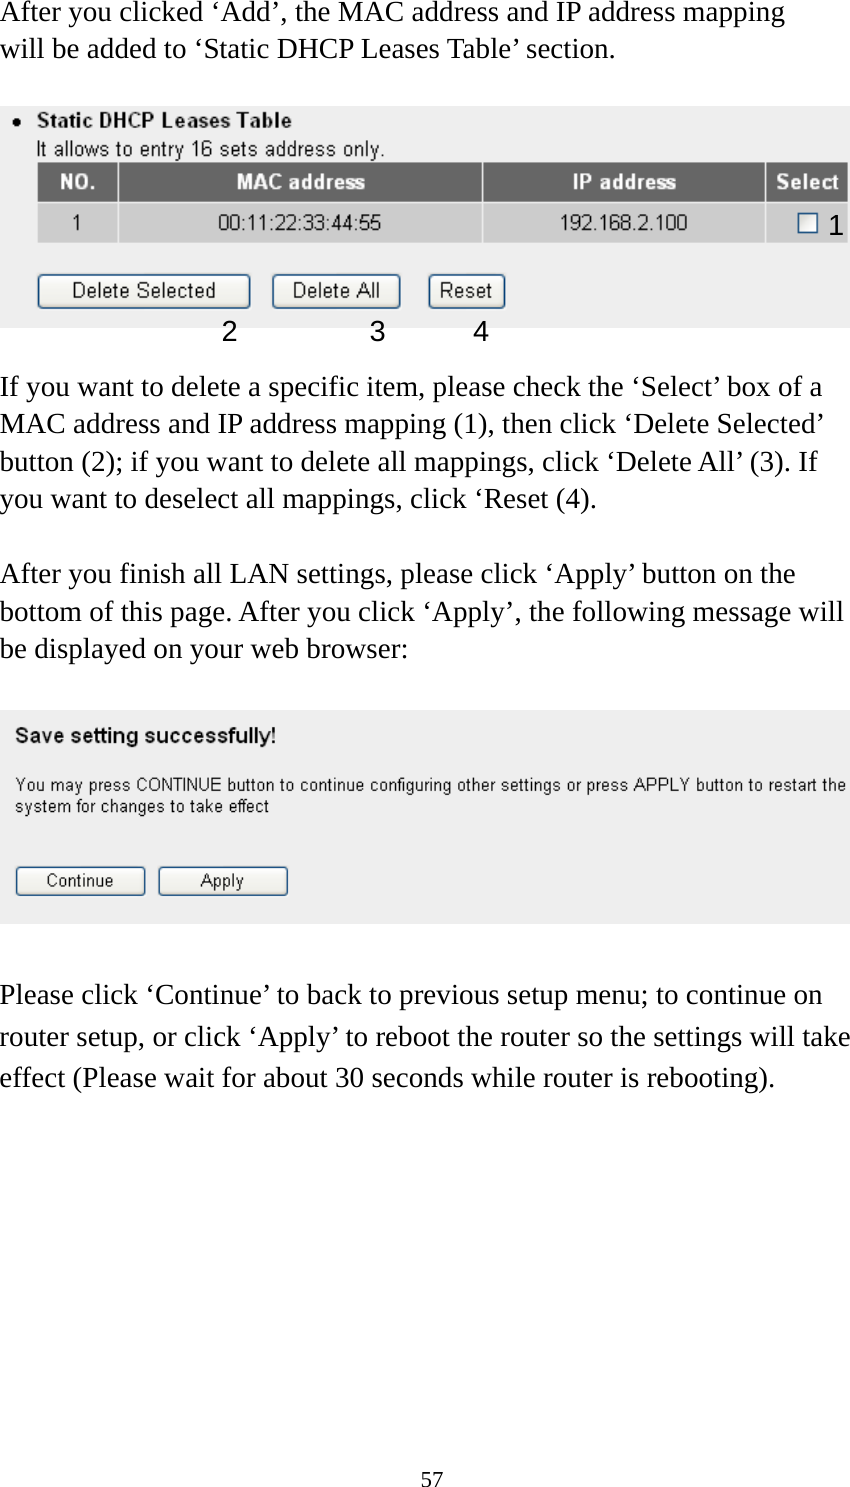 57 After you clicked ‘Add’, the MAC address and IP address mapping will be added to ‘Static DHCP Leases Table’ section.    If you want to delete a specific item, please check the ‘Select’ box of a MAC address and IP address mapping (1), then click ‘Delete Selected’ button (2); if you want to delete all mappings, click ‘Delete All’ (3). If you want to deselect all mappings, click ‘Reset (4).  After you finish all LAN settings, please click ‘Apply’ button on the bottom of this page. After you click ‘Apply’, the following message will be displayed on your web browser:    Please click ‘Continue’ to back to previous setup menu; to continue on router setup, or click ‘Apply’ to reboot the router so the settings will take effect (Please wait for about 30 seconds while router is rebooting). 1 2 3 4 